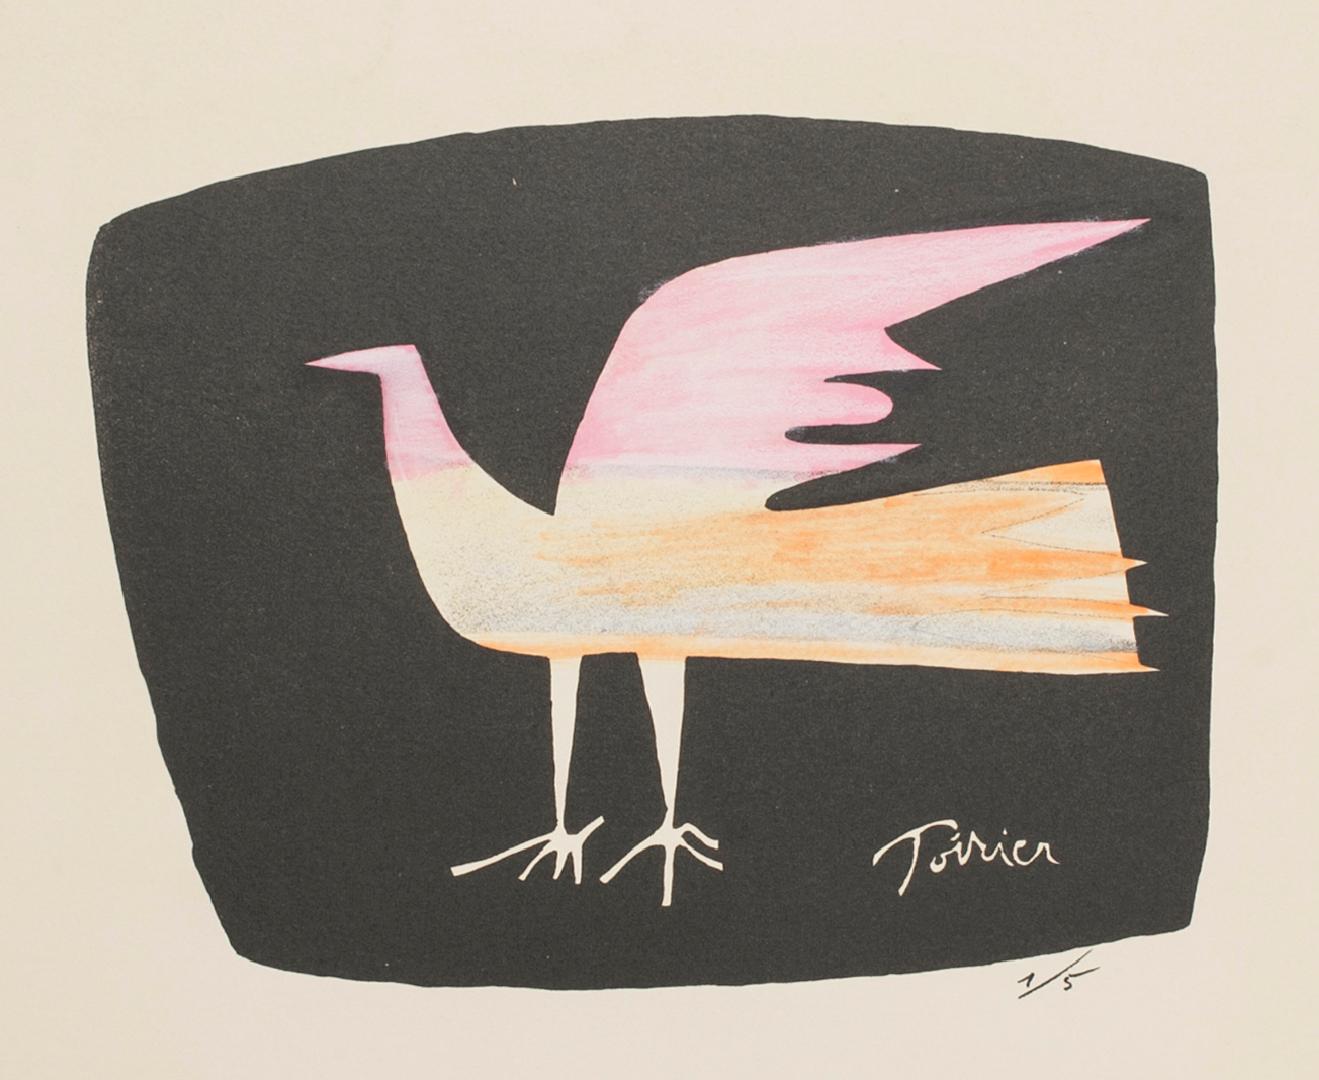 Bird is an original lithograph on ivory paper realized by Emanuel Poirier.

Signed on the plate, on the lower right.

Numbered, edition of 1/5 prints

The state of preservation is very good.

The artwork represents a colorful bird with a black